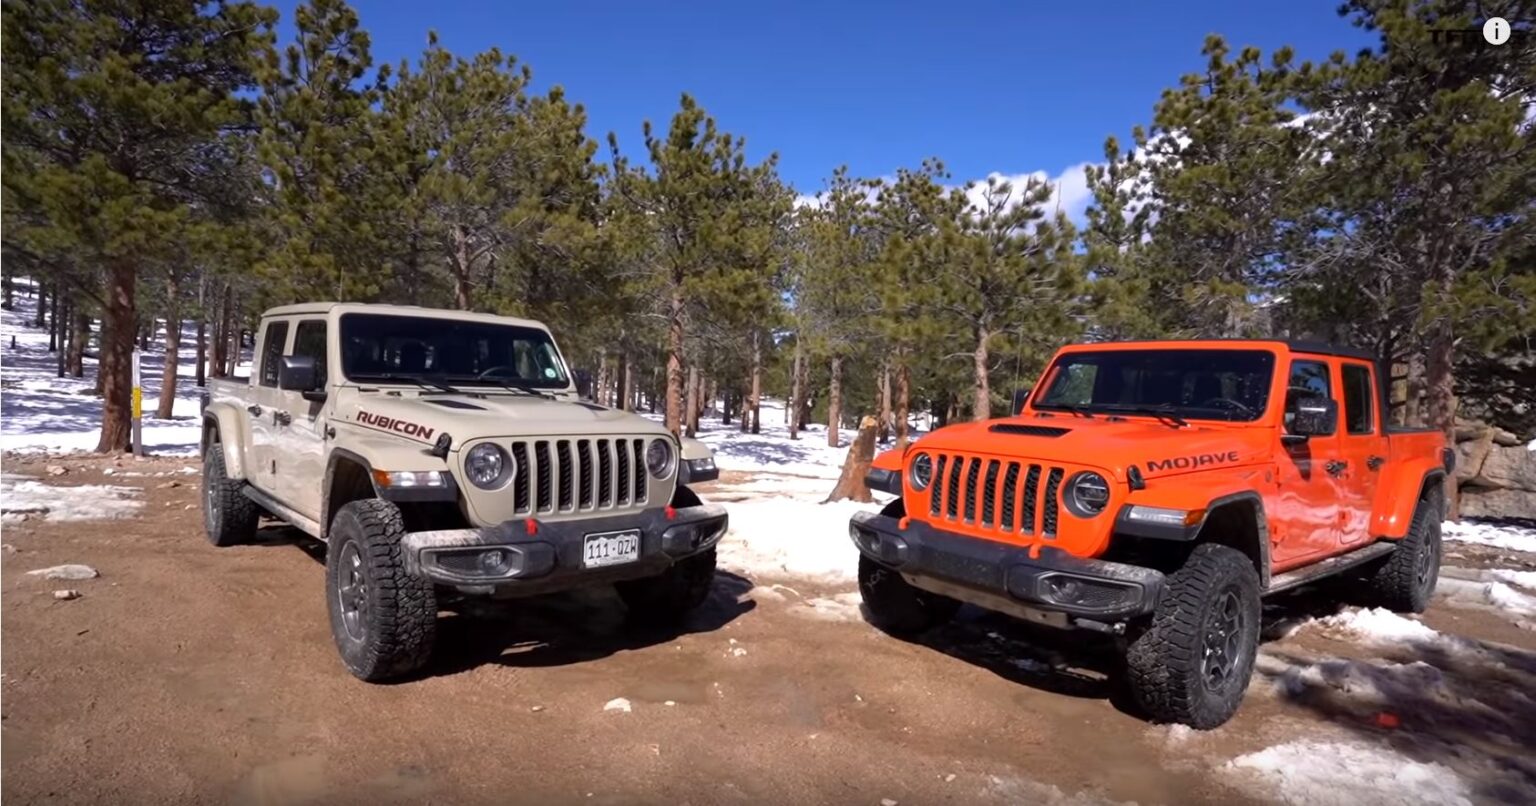 Gladiator Mojave vs. Rubicon Which One Is the Master Offroader?